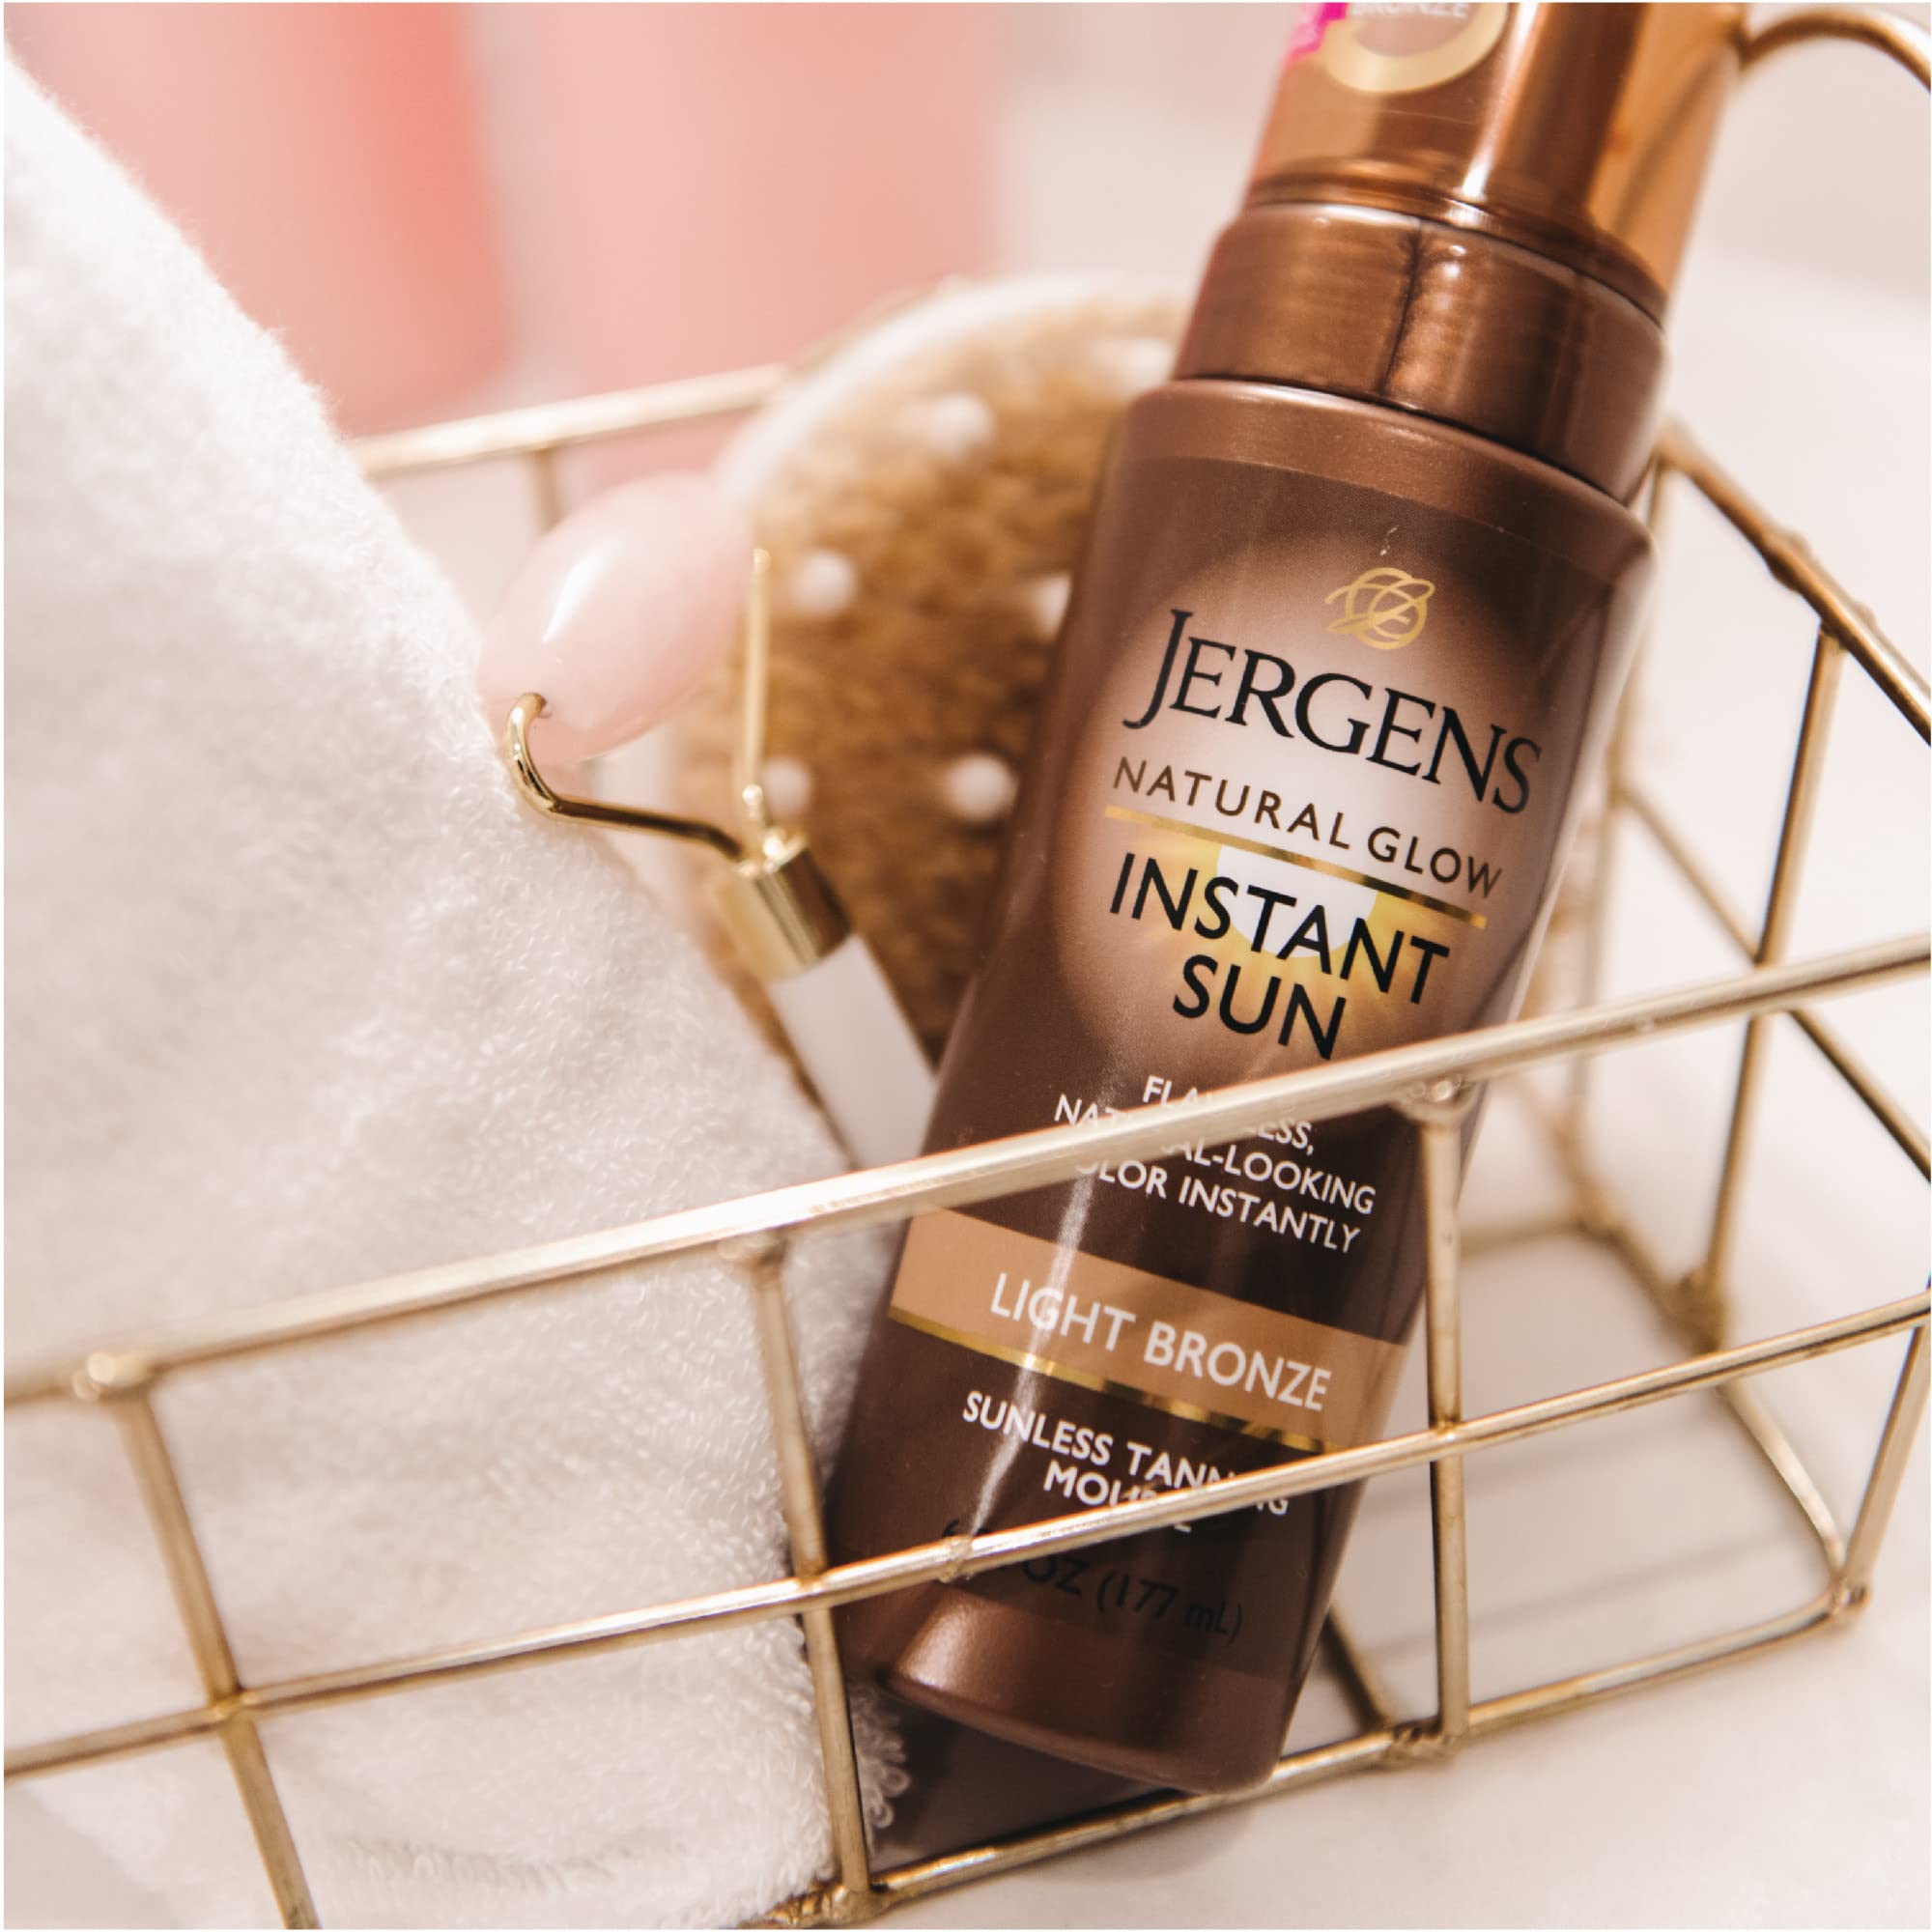 Jergens Natural Glow Instant Sun Body Mousse, Self Tanner for Light Bronze Tan, Sunless Tanning Body Bronzer, Fake Tan for Fair to Medium Skin, 6 Ounce